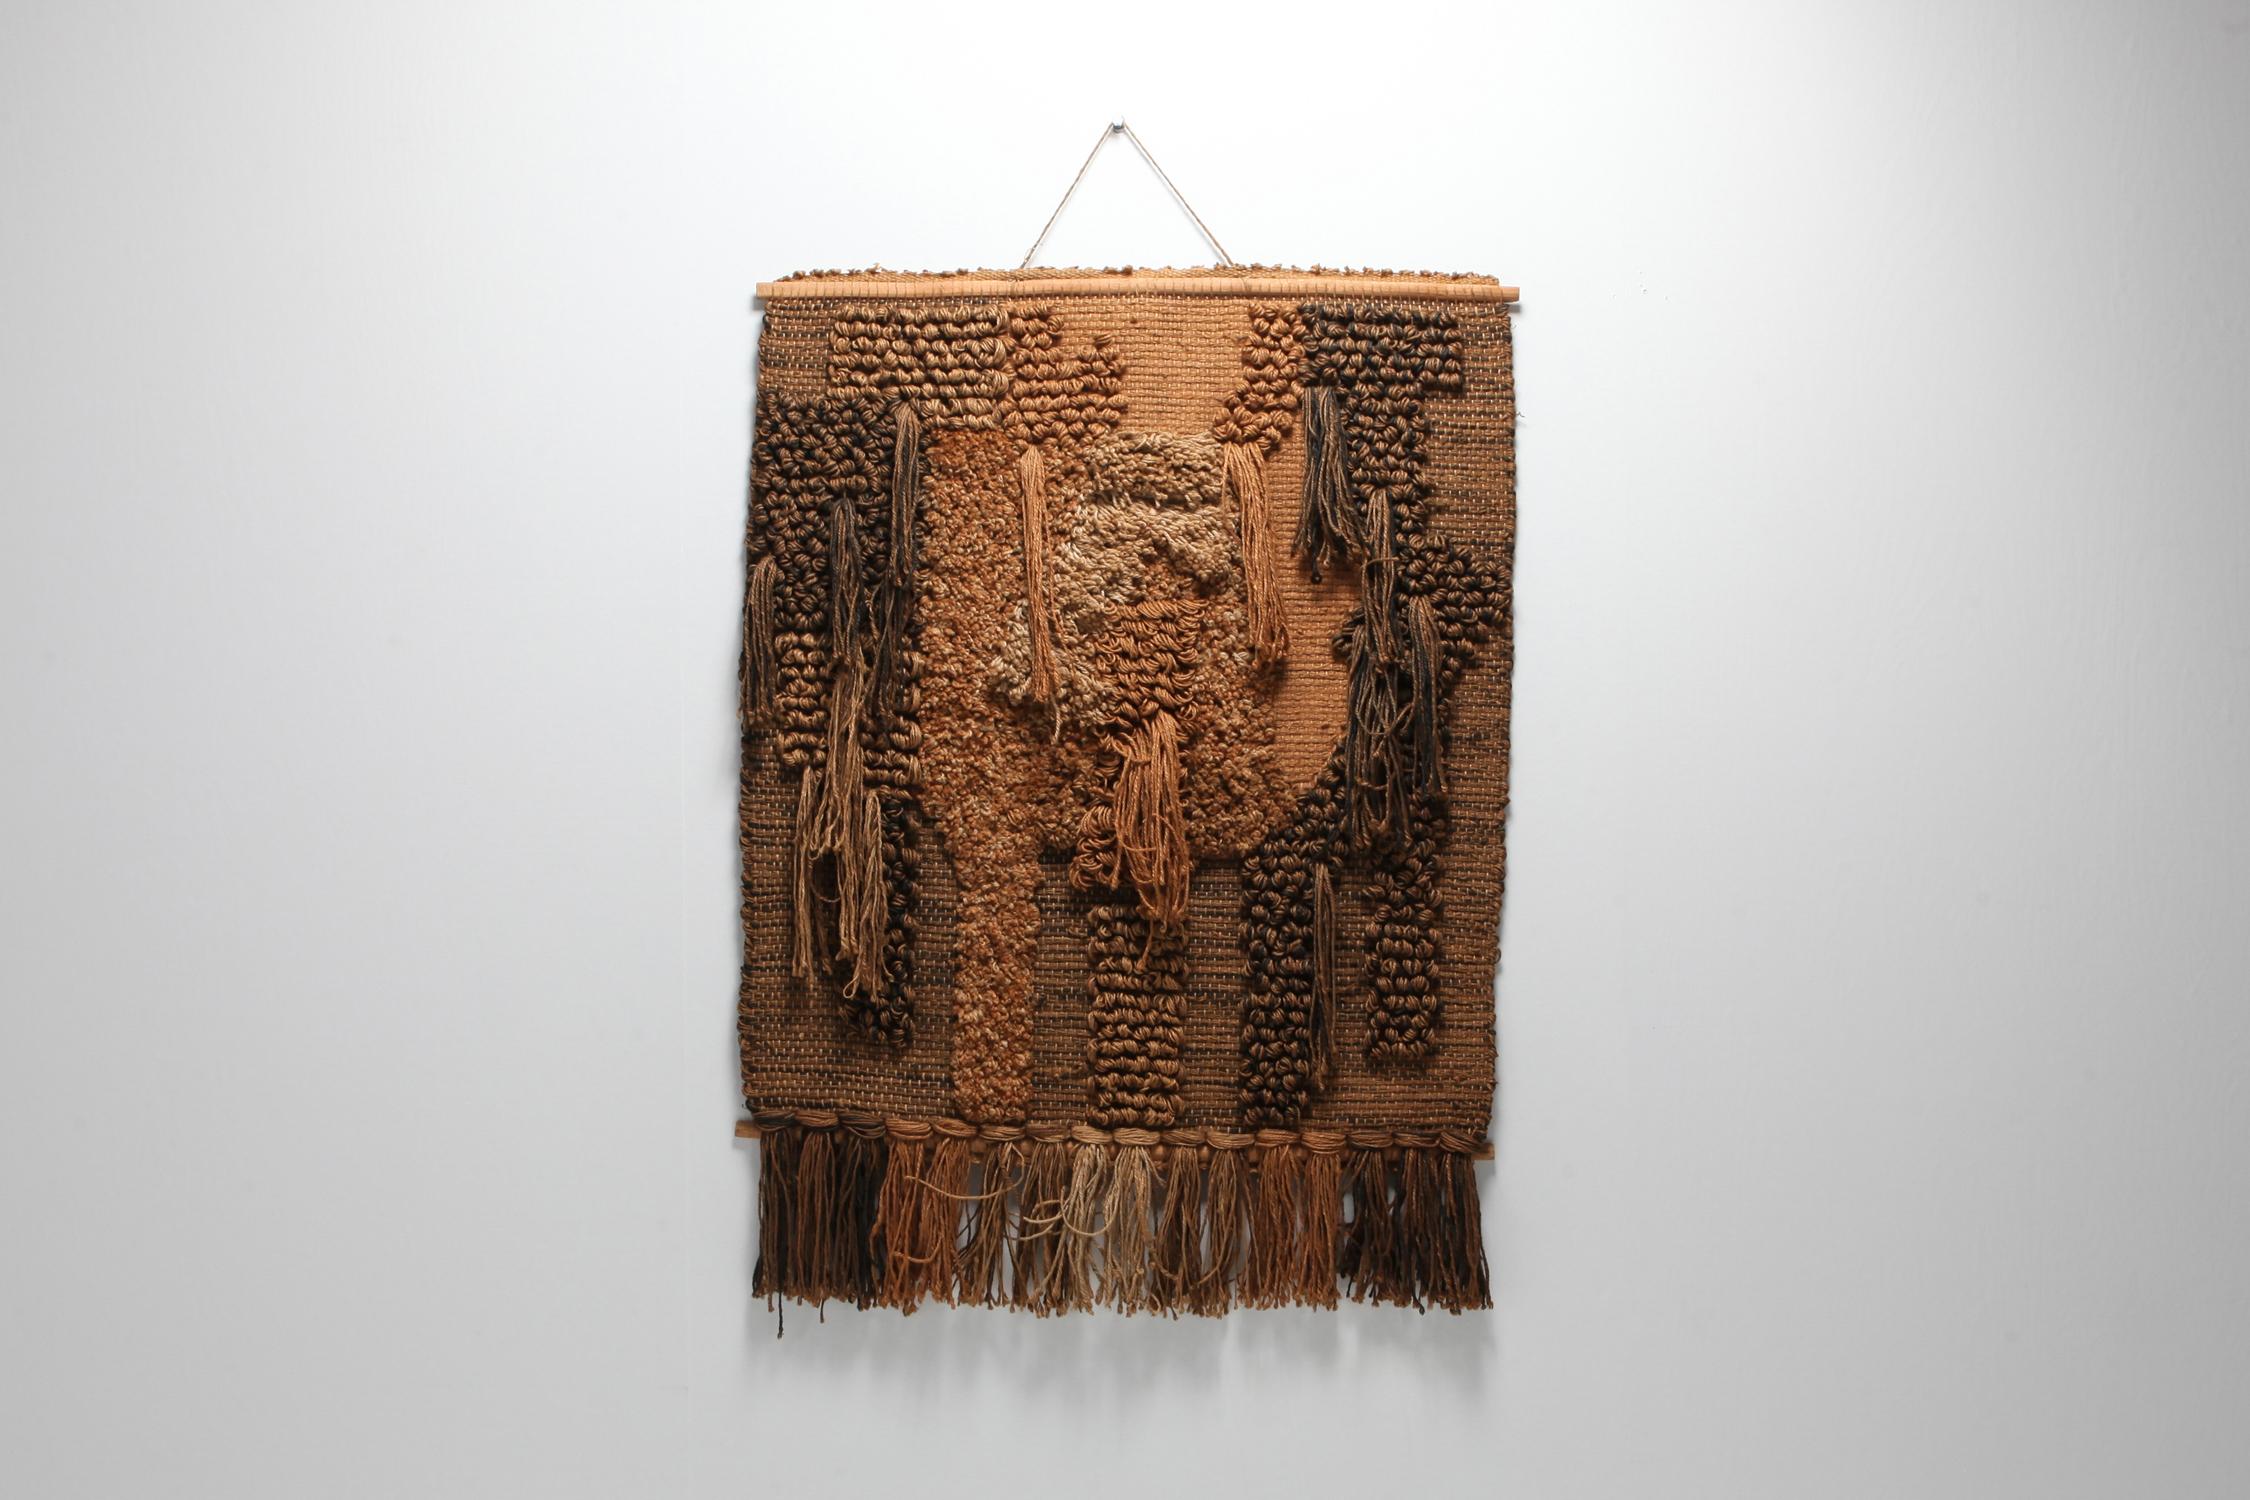 Vintage Macrame wall tapestry Belgium 1970s by Tapta
In the 1970s in Belgium a lot of artists like Veerle Dupont, Suzannah Olieux, Hetty Van Boekhout, Liberta Ferket en Edith Van Driessche expressed themselves with textile.
Beautiful earthy 'nude'